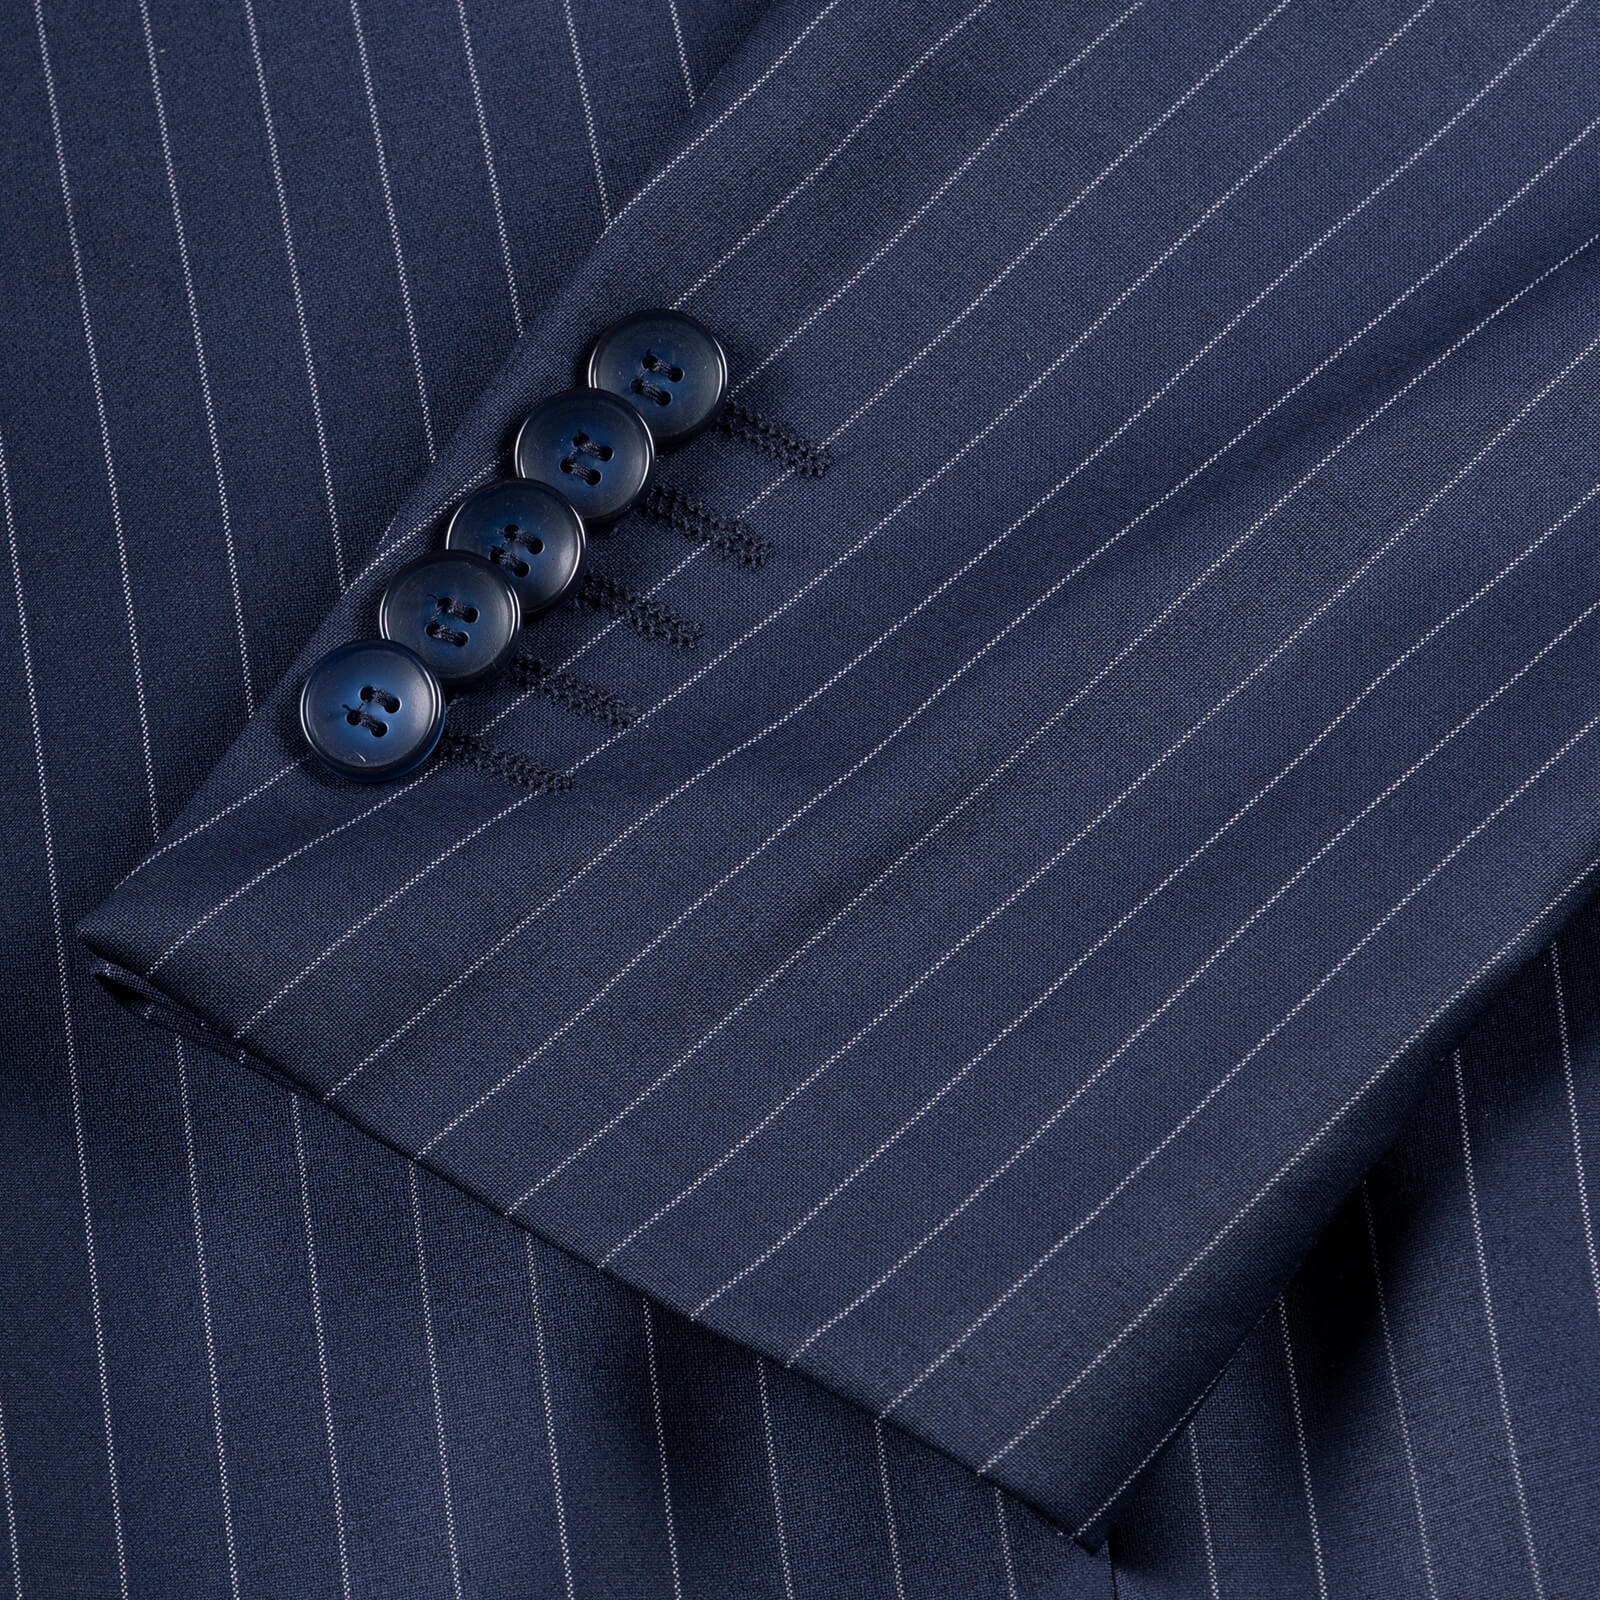 Striped Suits - Buy Striped Suits online in India